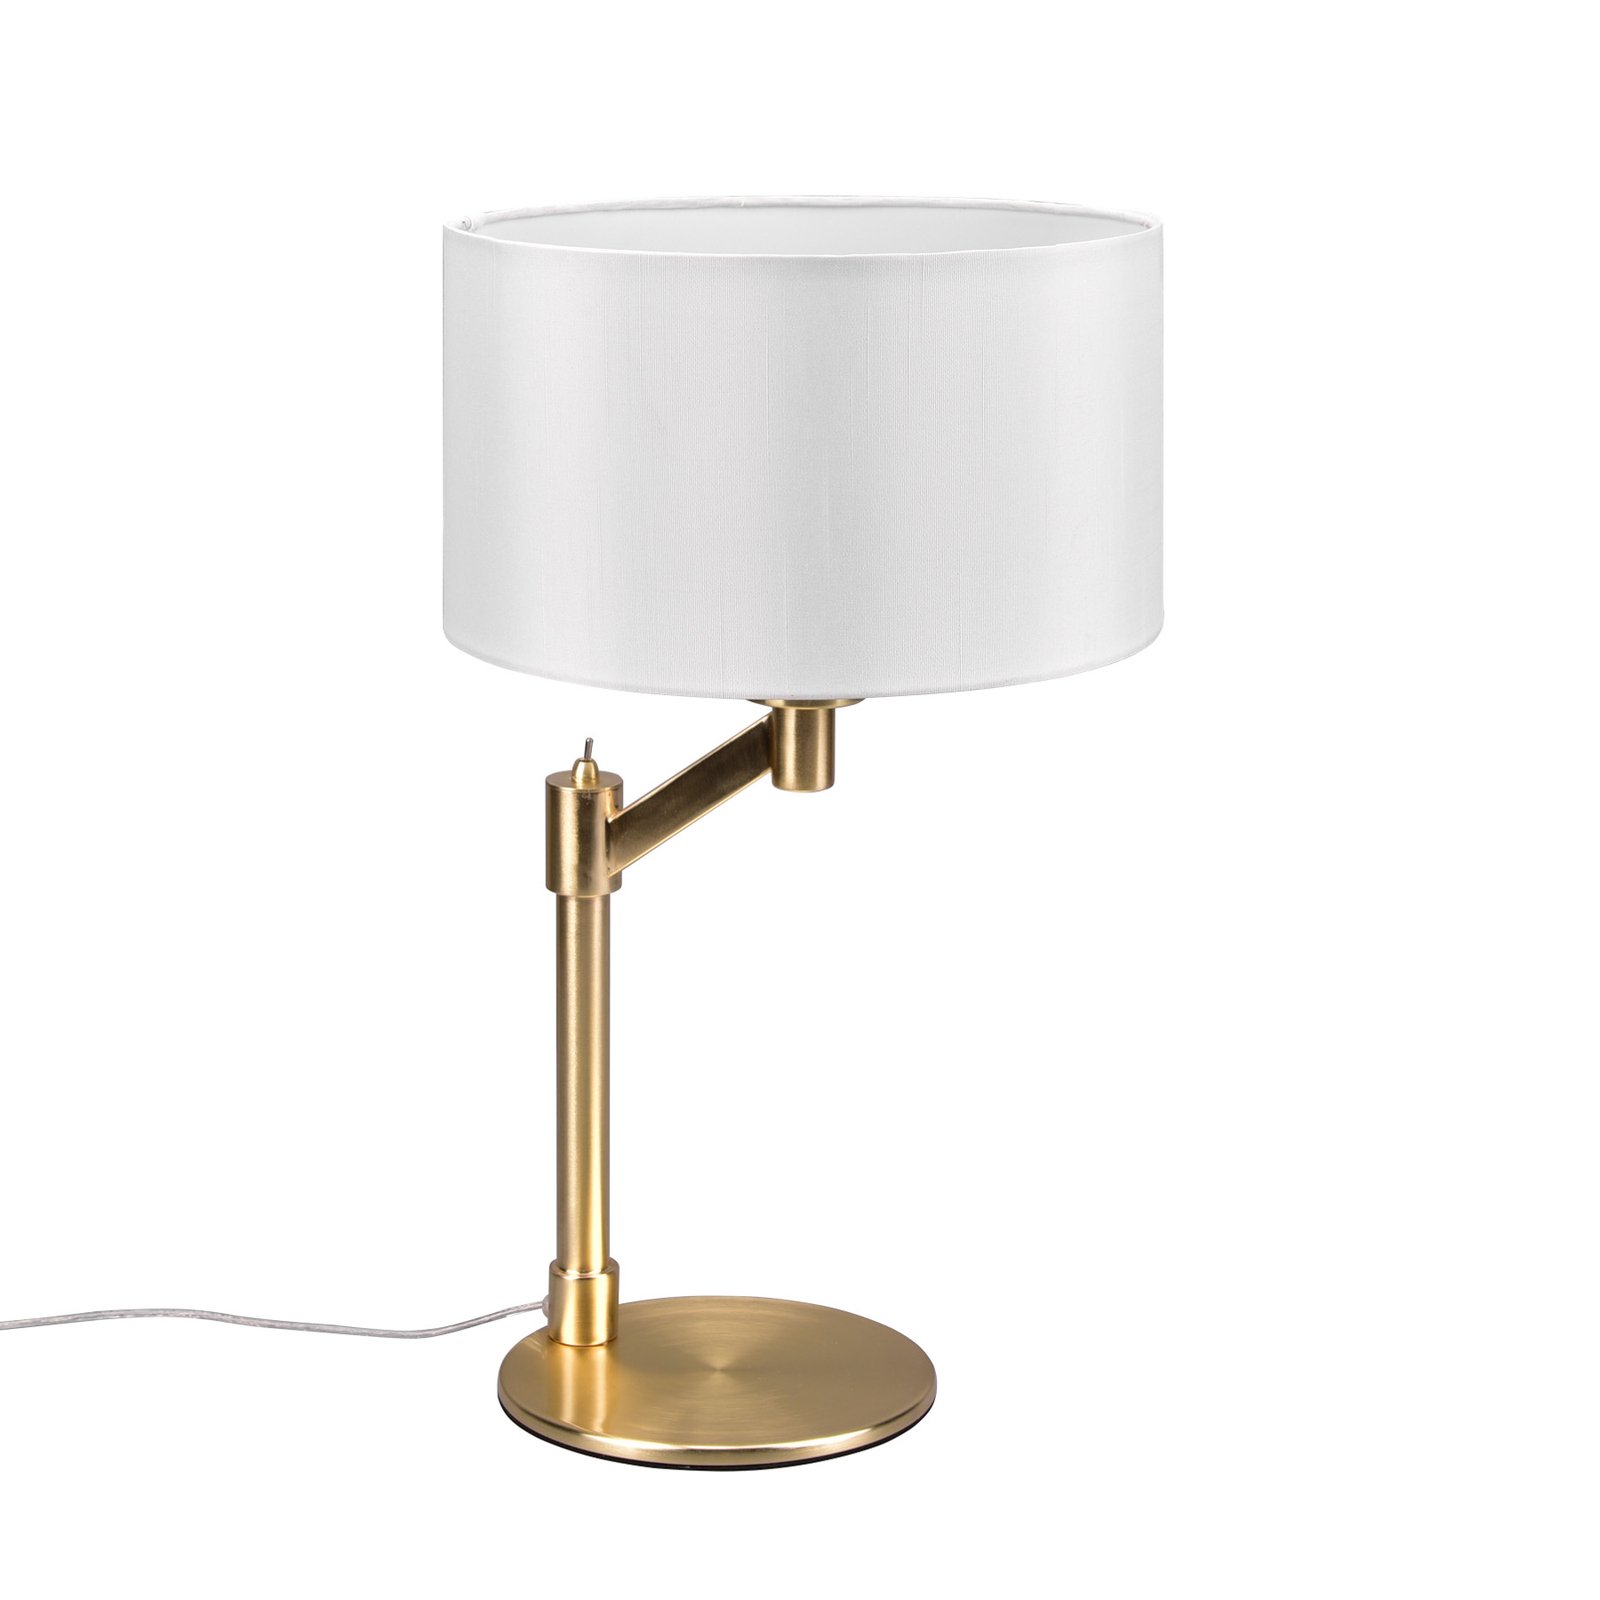 Cassio table lamp with fabric shade, brass